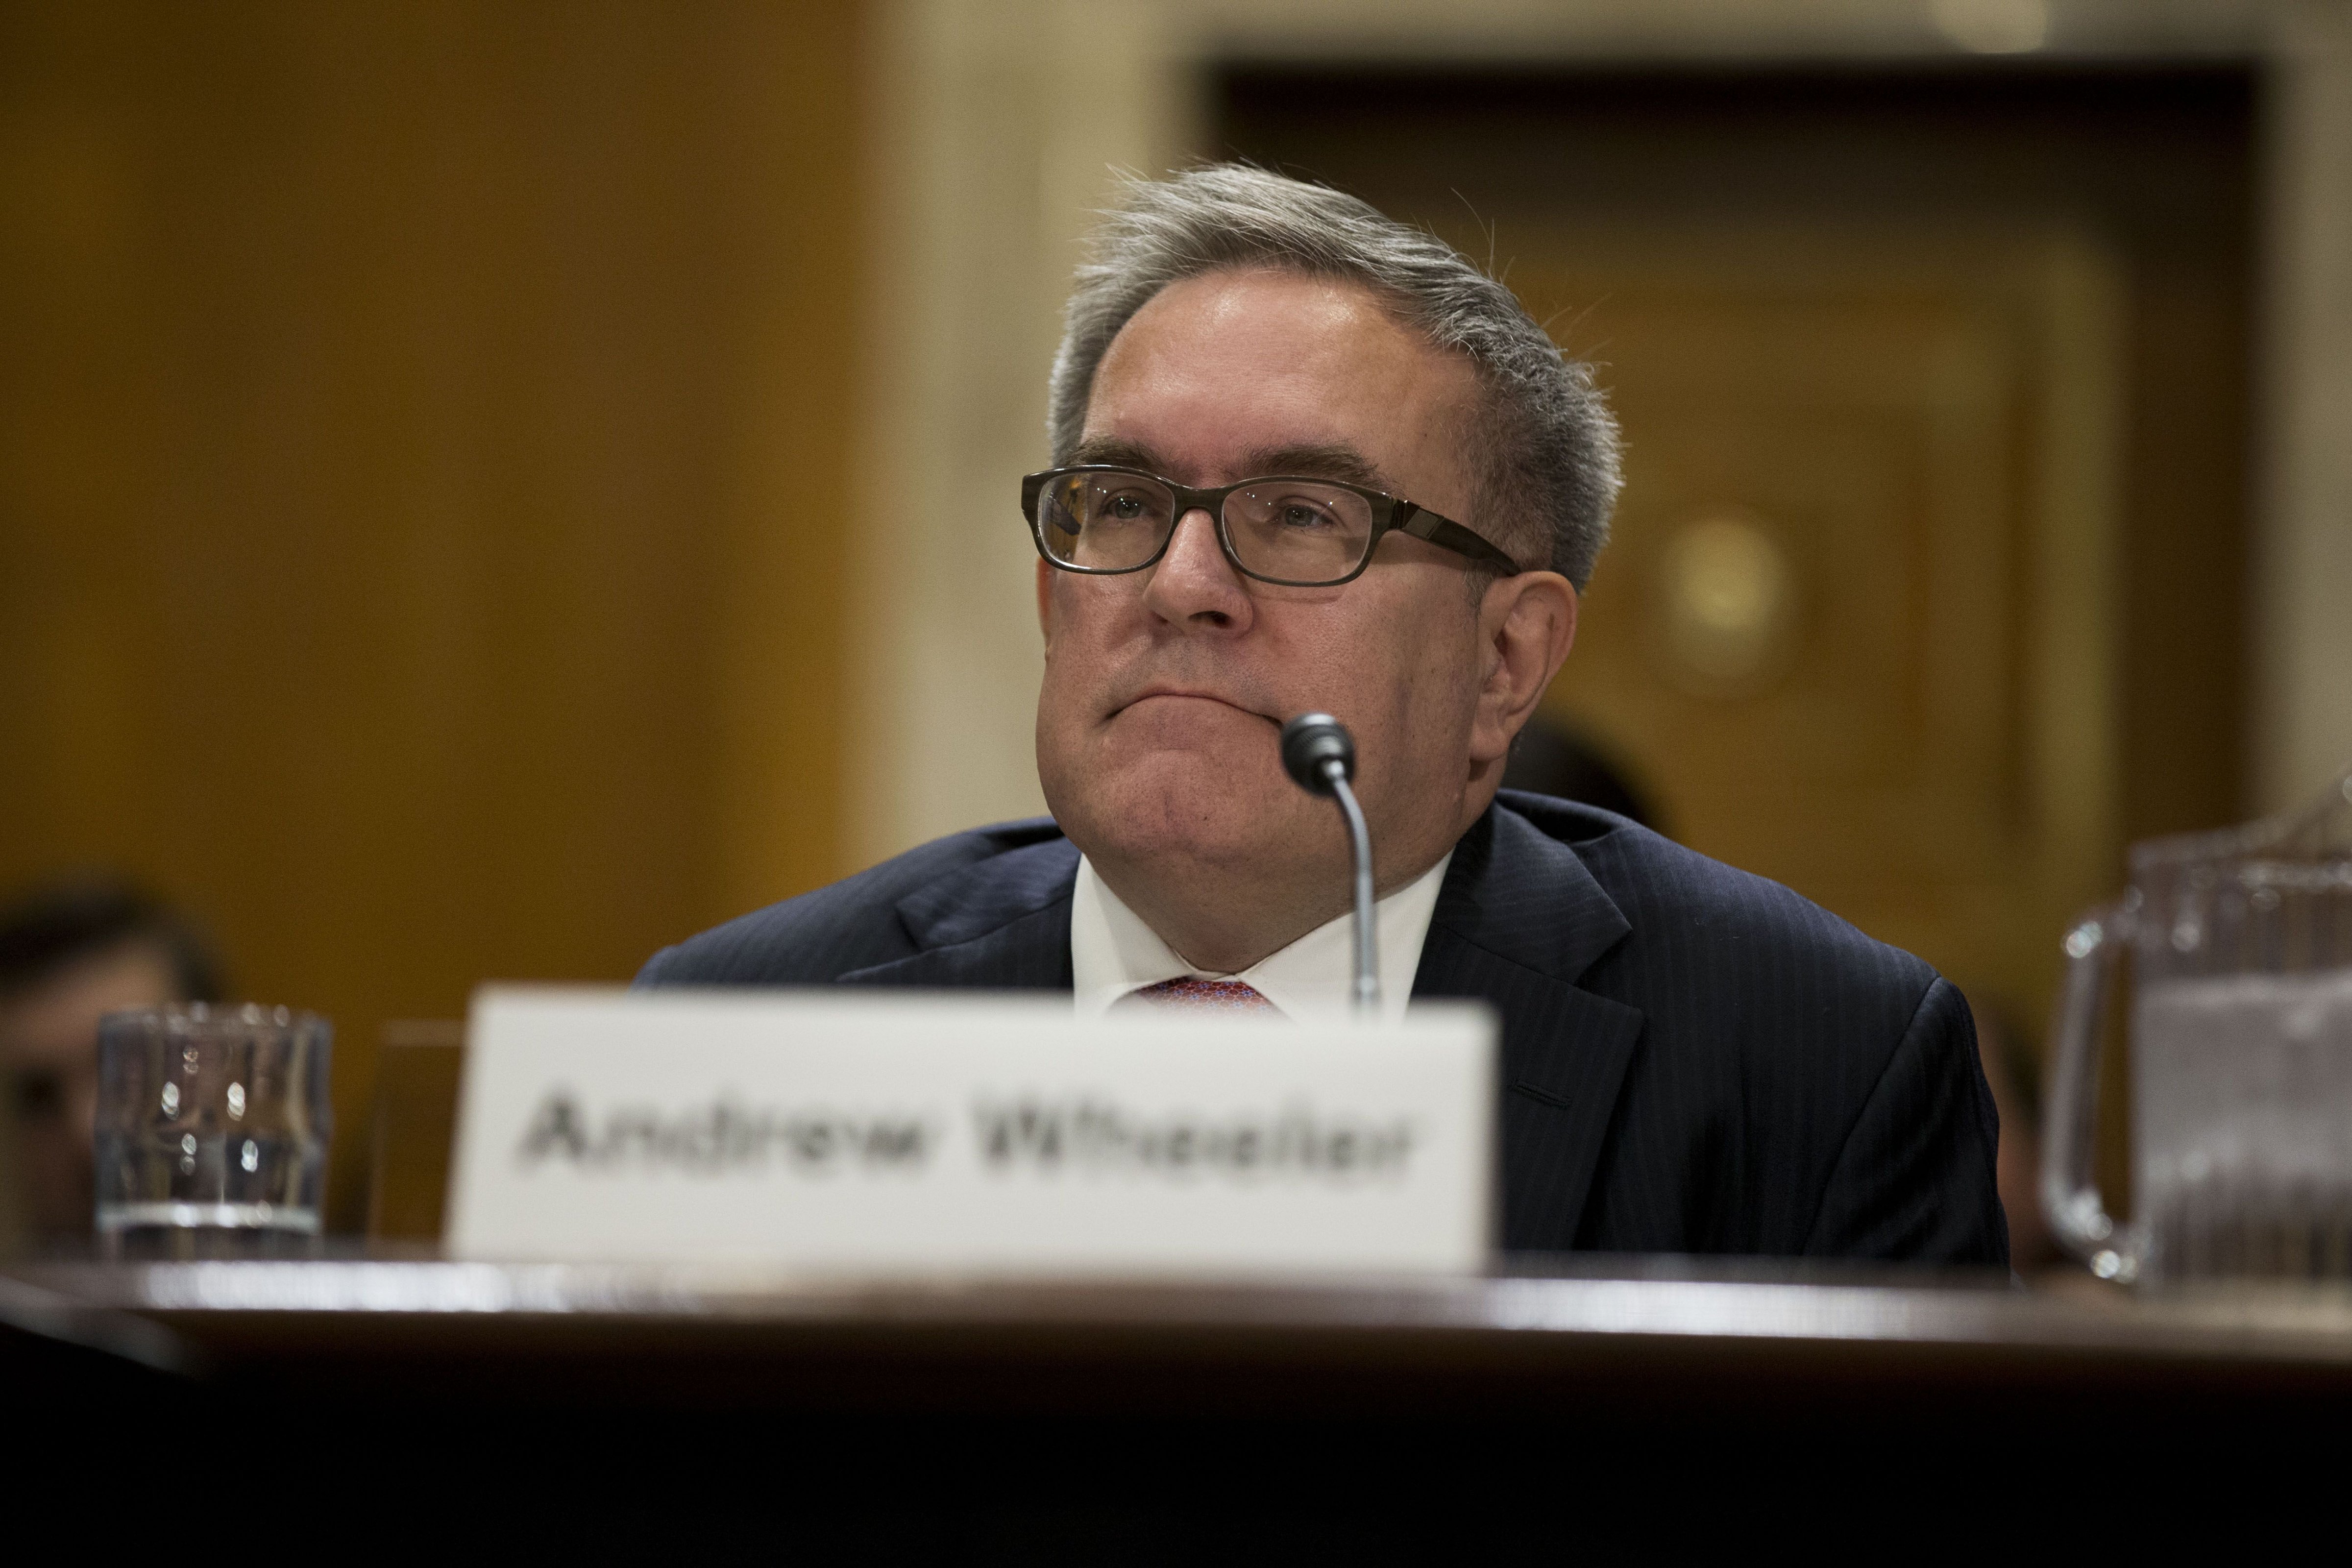 Andrew Wheeler during his confirmation hearing to be Deputy Administrator of the Environmental Protection Agency before the United States Senate Committee on the Environment and Public Works on Capitol Hill in Washington, D.C. on Nov. 8th, 2017. (REX/Shutterstock—REX/Shutterstock)